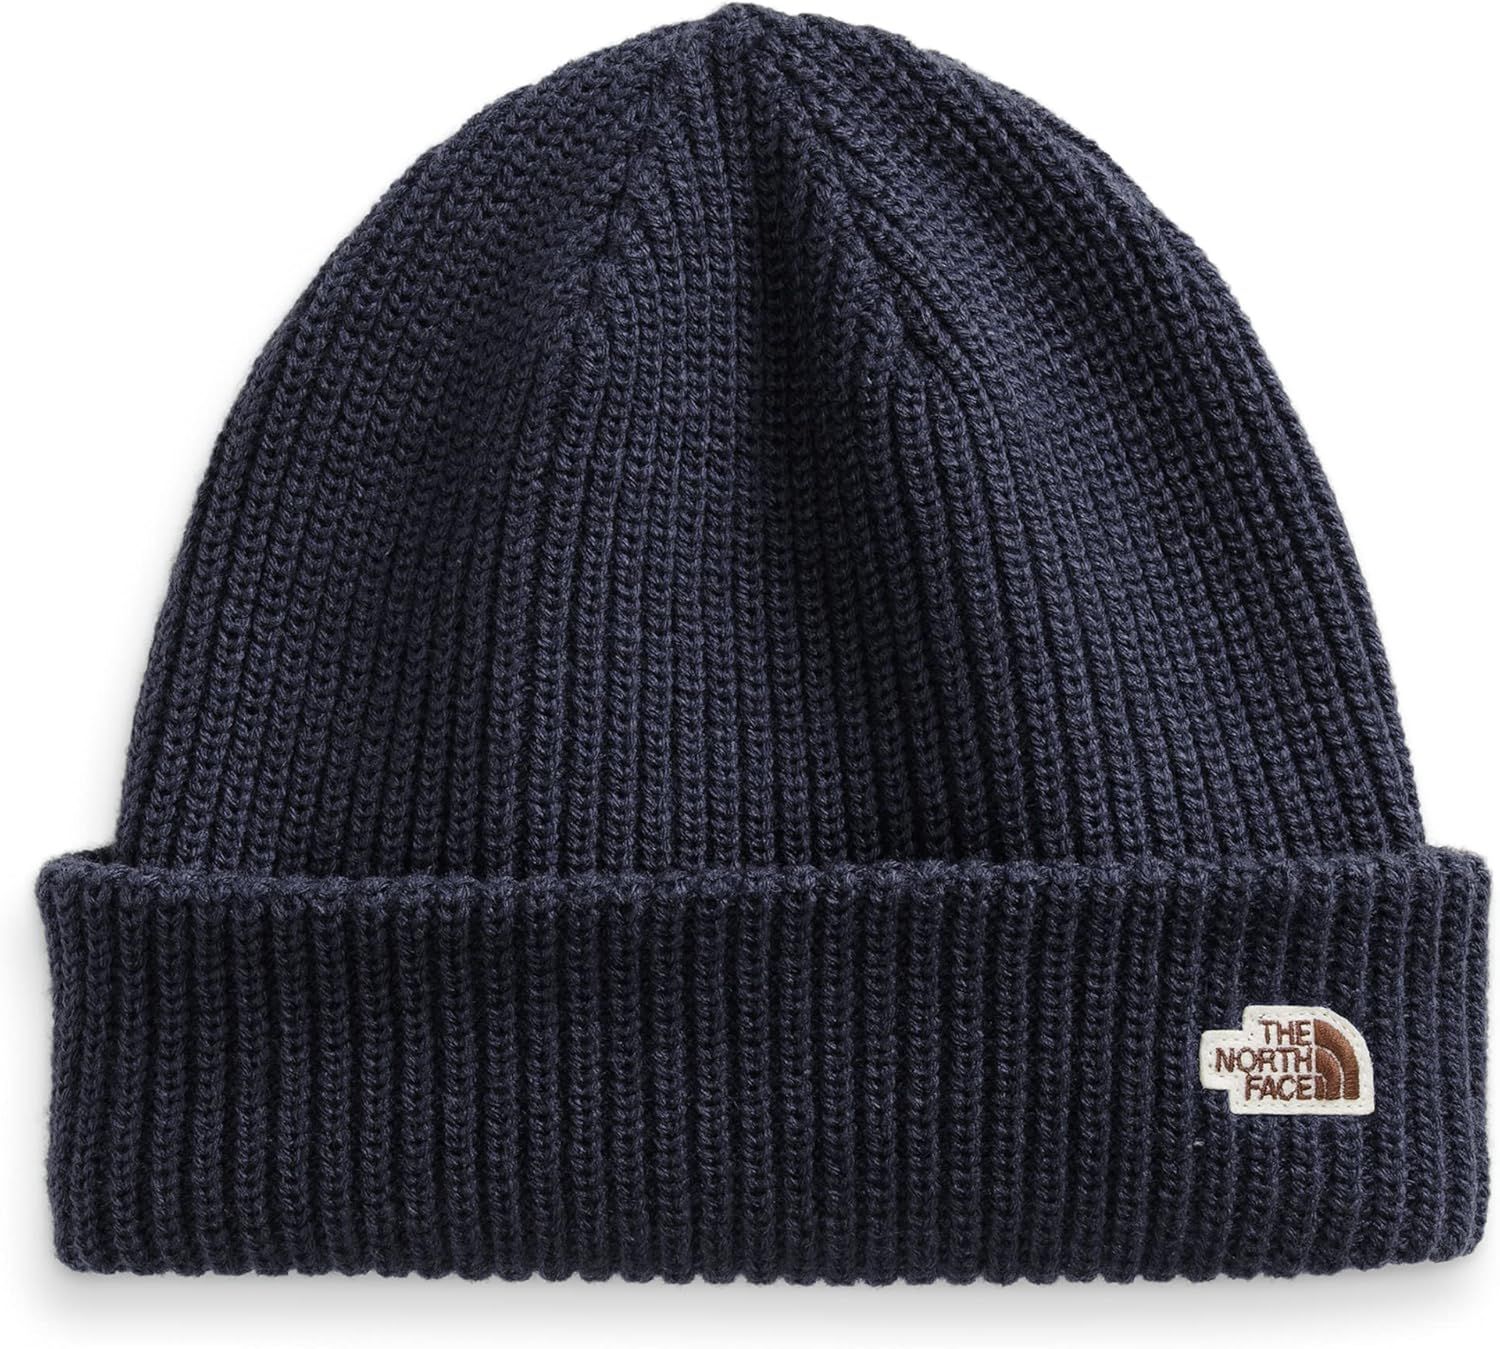 The North Face Salty Dog Beanie - Regular Fit | Amazon (US)